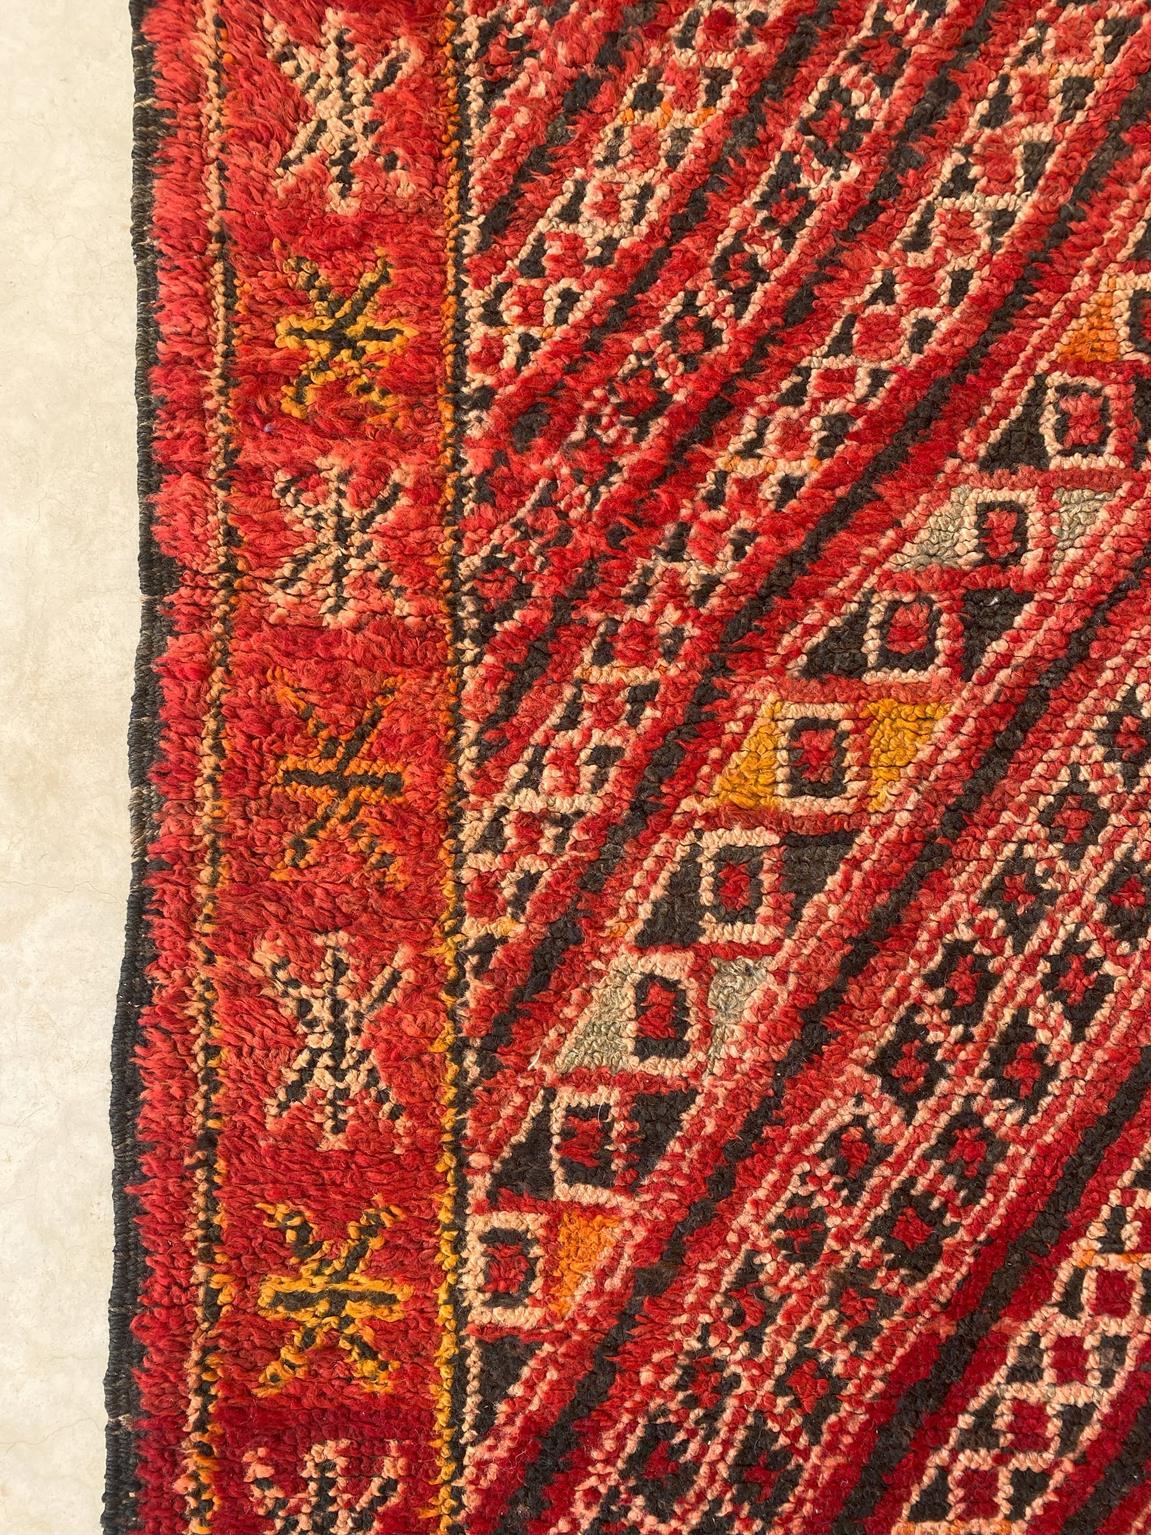 Vintage Moroccan Zayane rug - Red - 6.7x11.3feet / 205x344cm For Sale 4